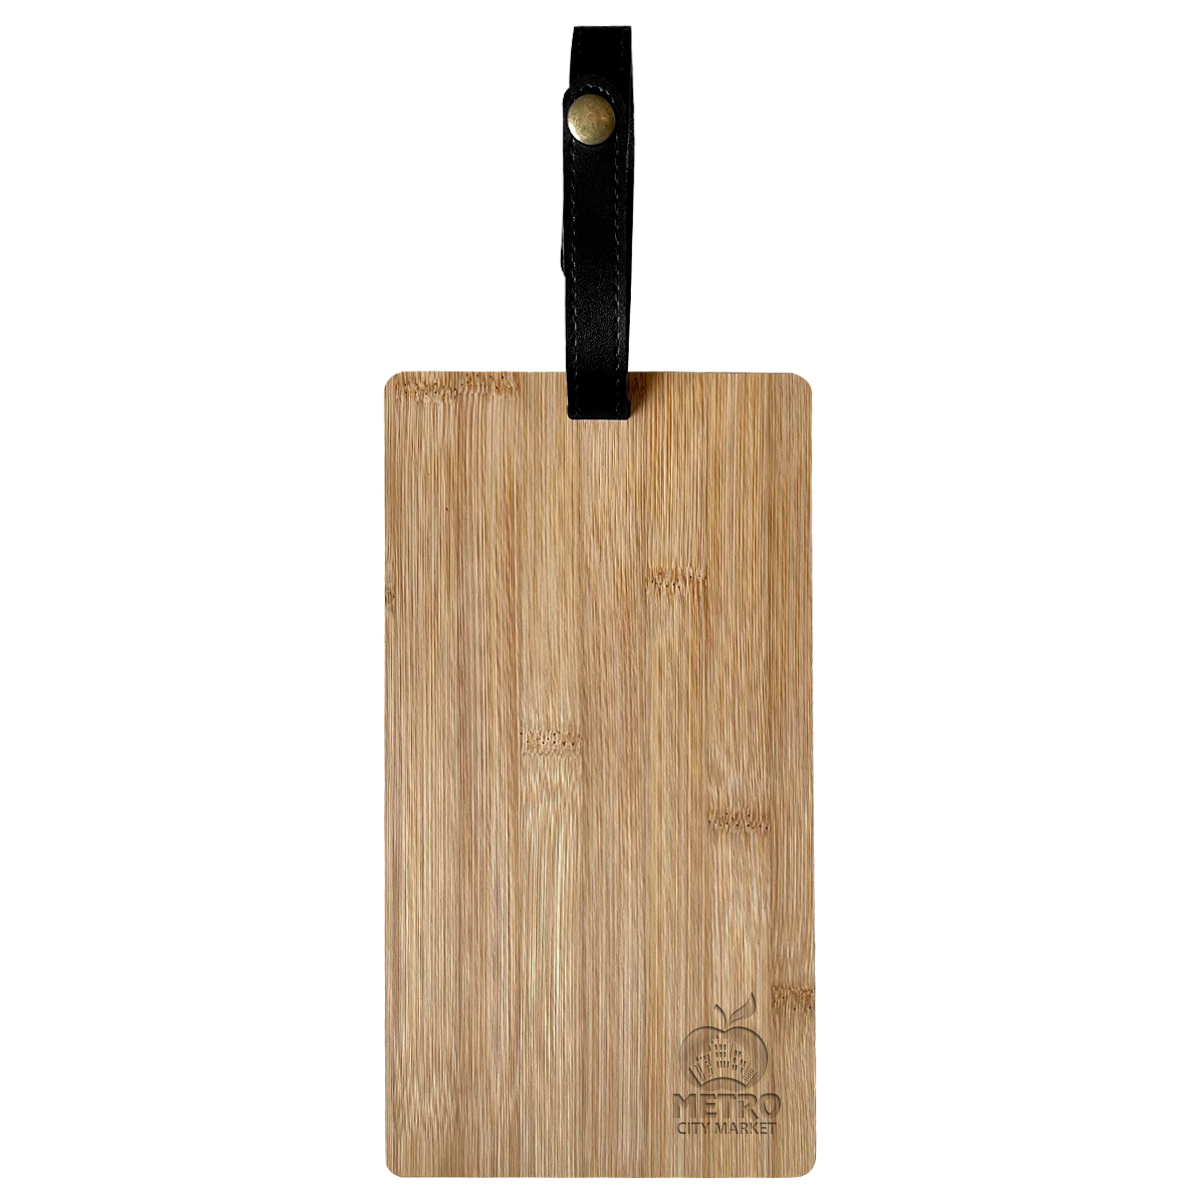 11 1/2 x 8 3/4 Eco Rectangle Cutting Board - Item #CGFT591 -   Custom Printed Promotional Products